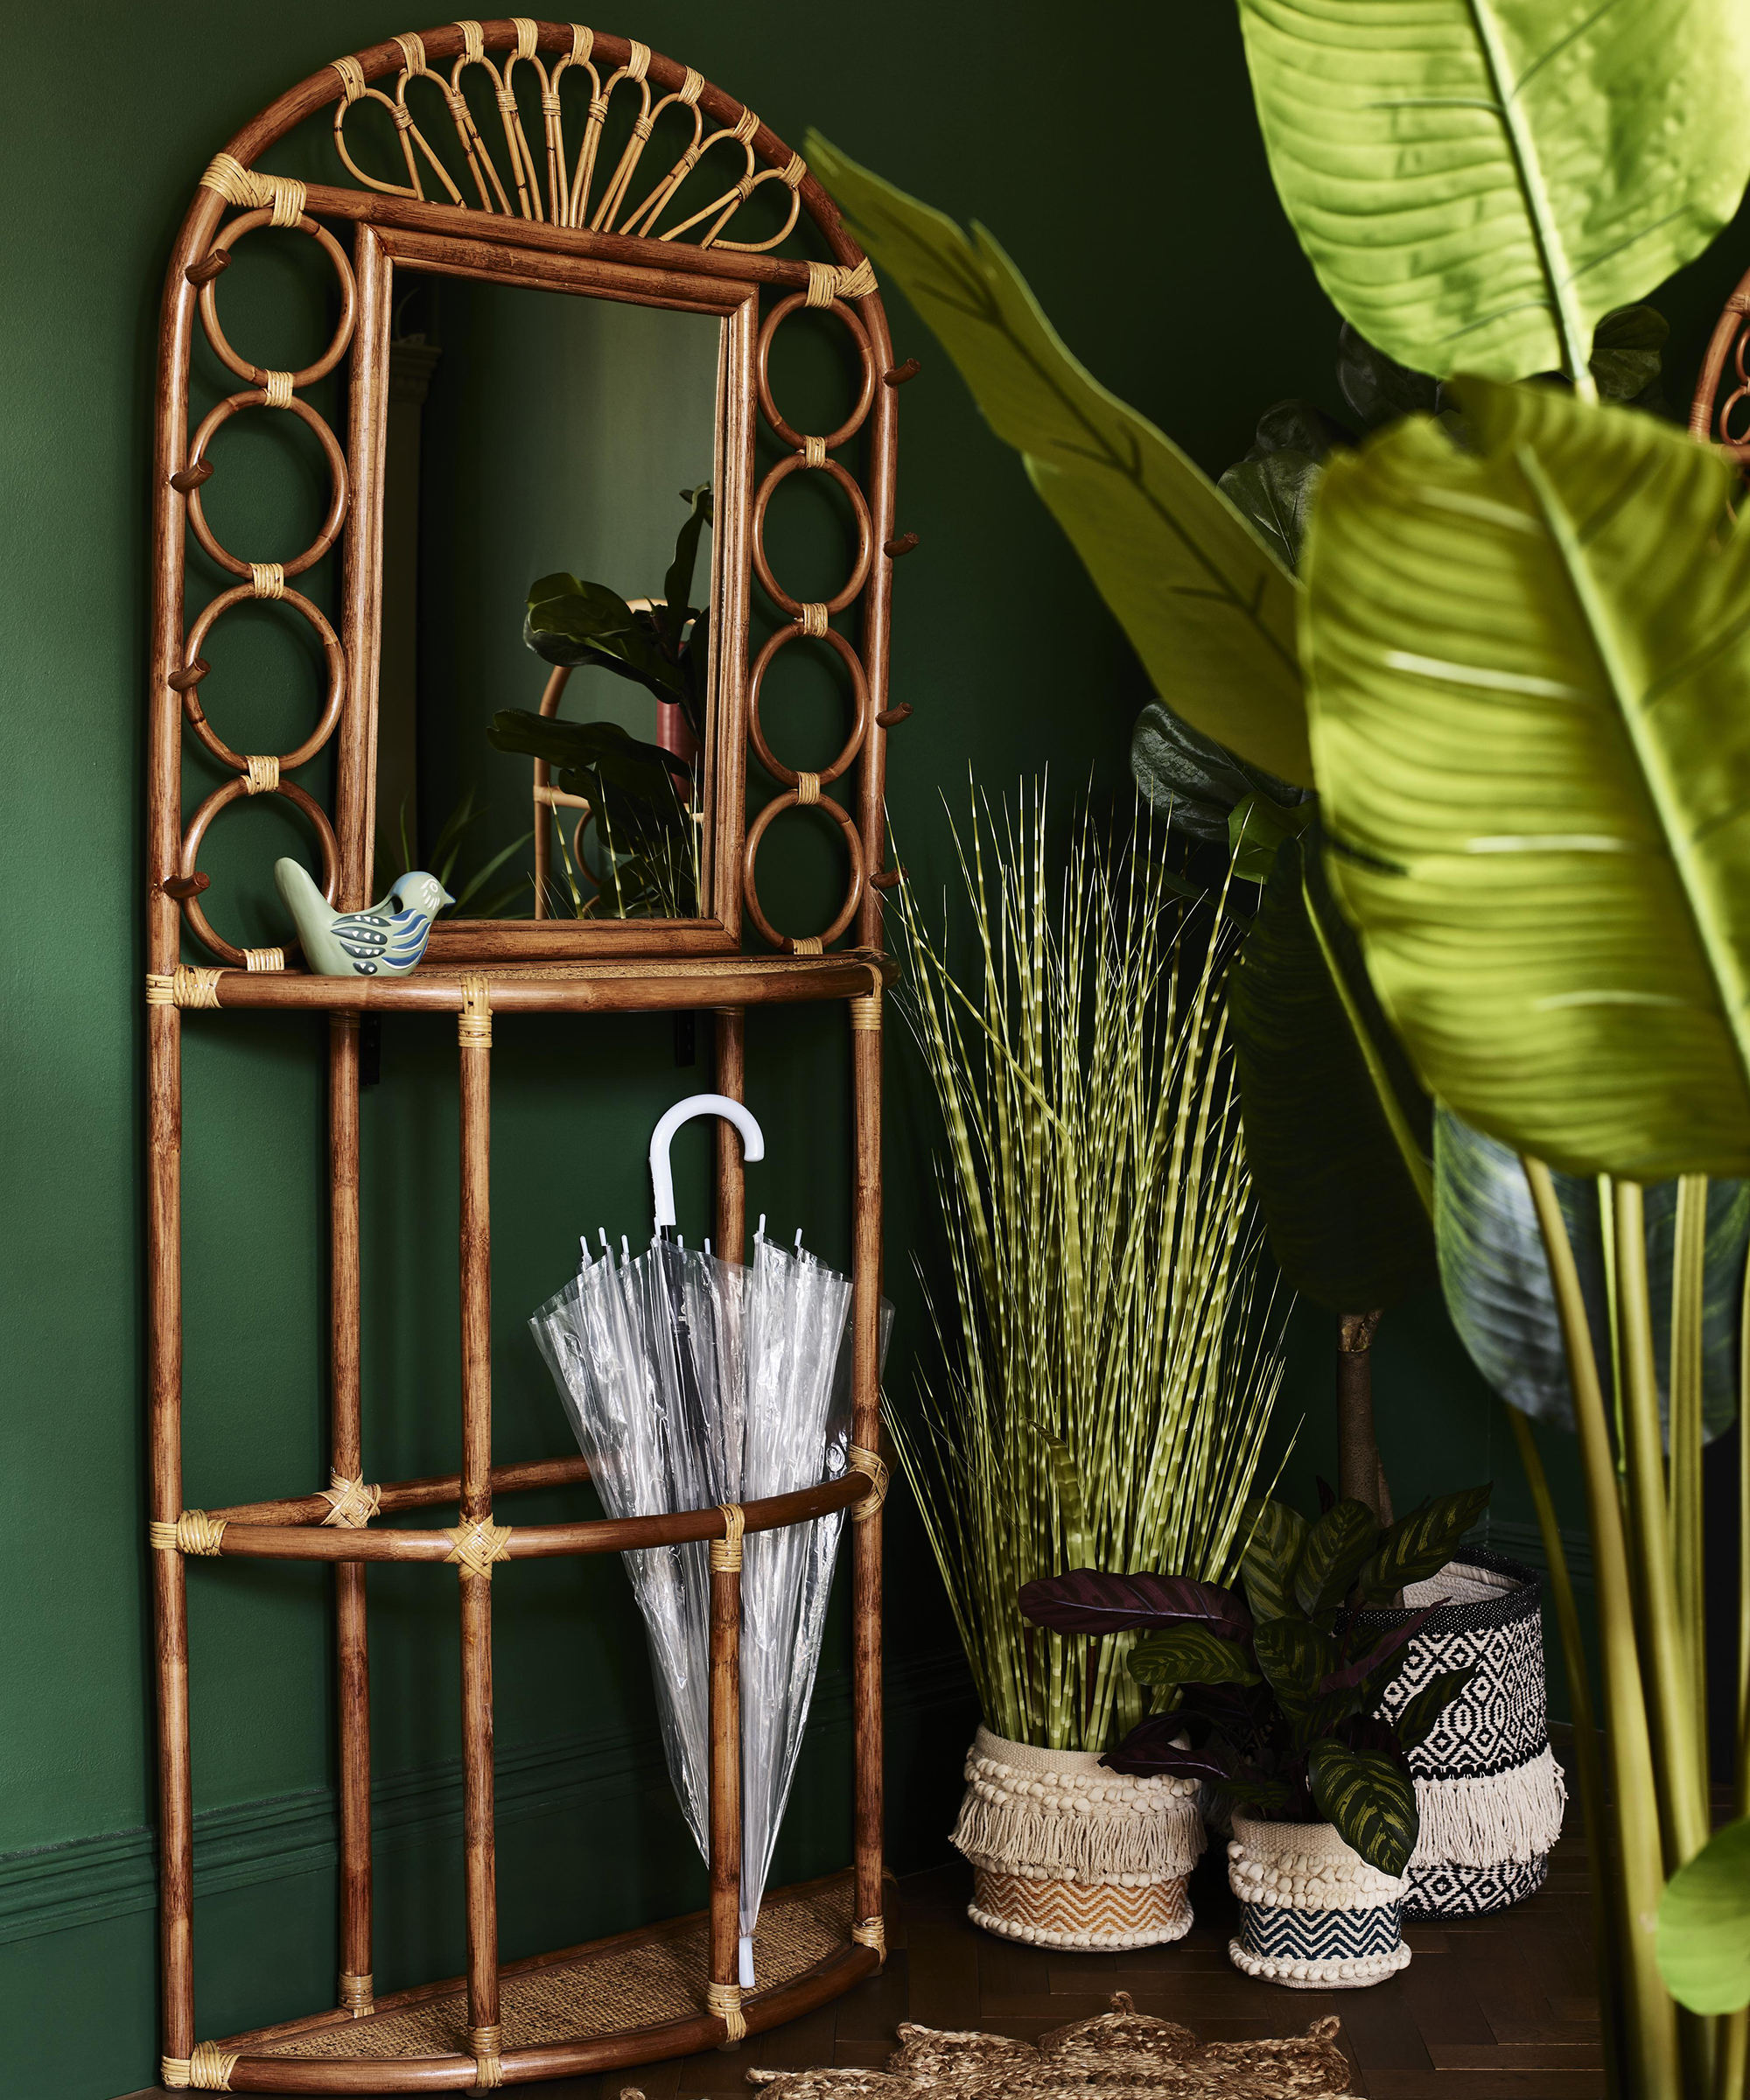 Hallway ideas by Oliver Bonas with rattan console table with built-in mirror and umbrella storage